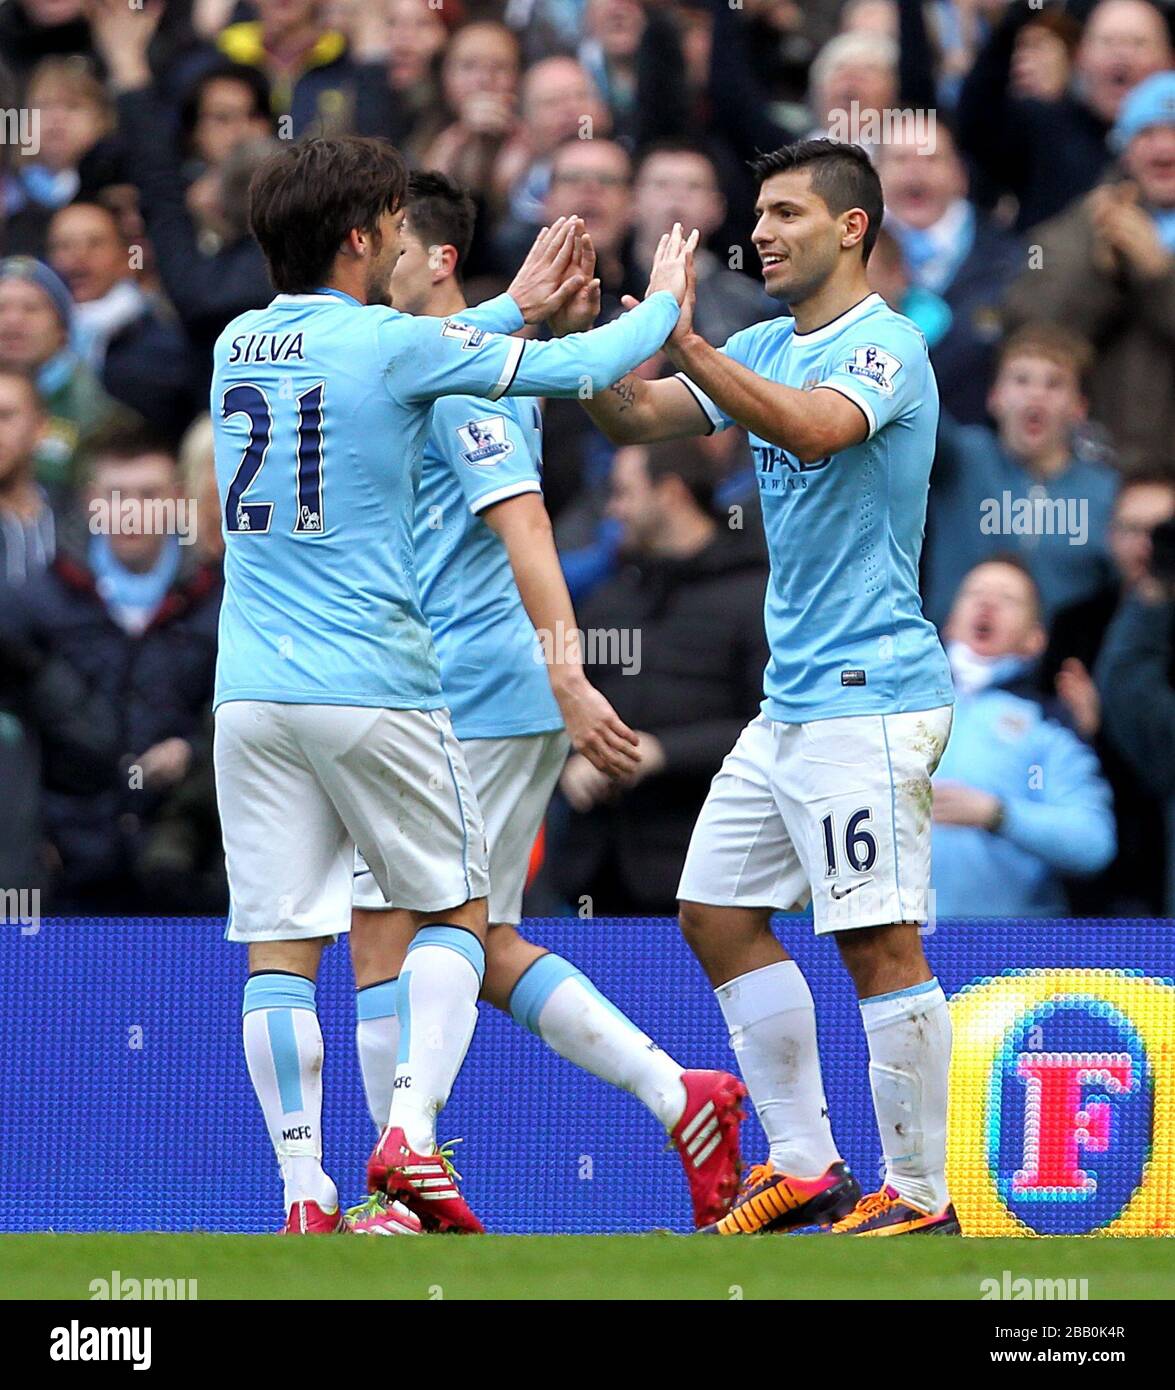 Manchester City's Sergio Aguero (right) celebrates with team-mate David Silva after scoring his side's first goal of the game Stock Photo